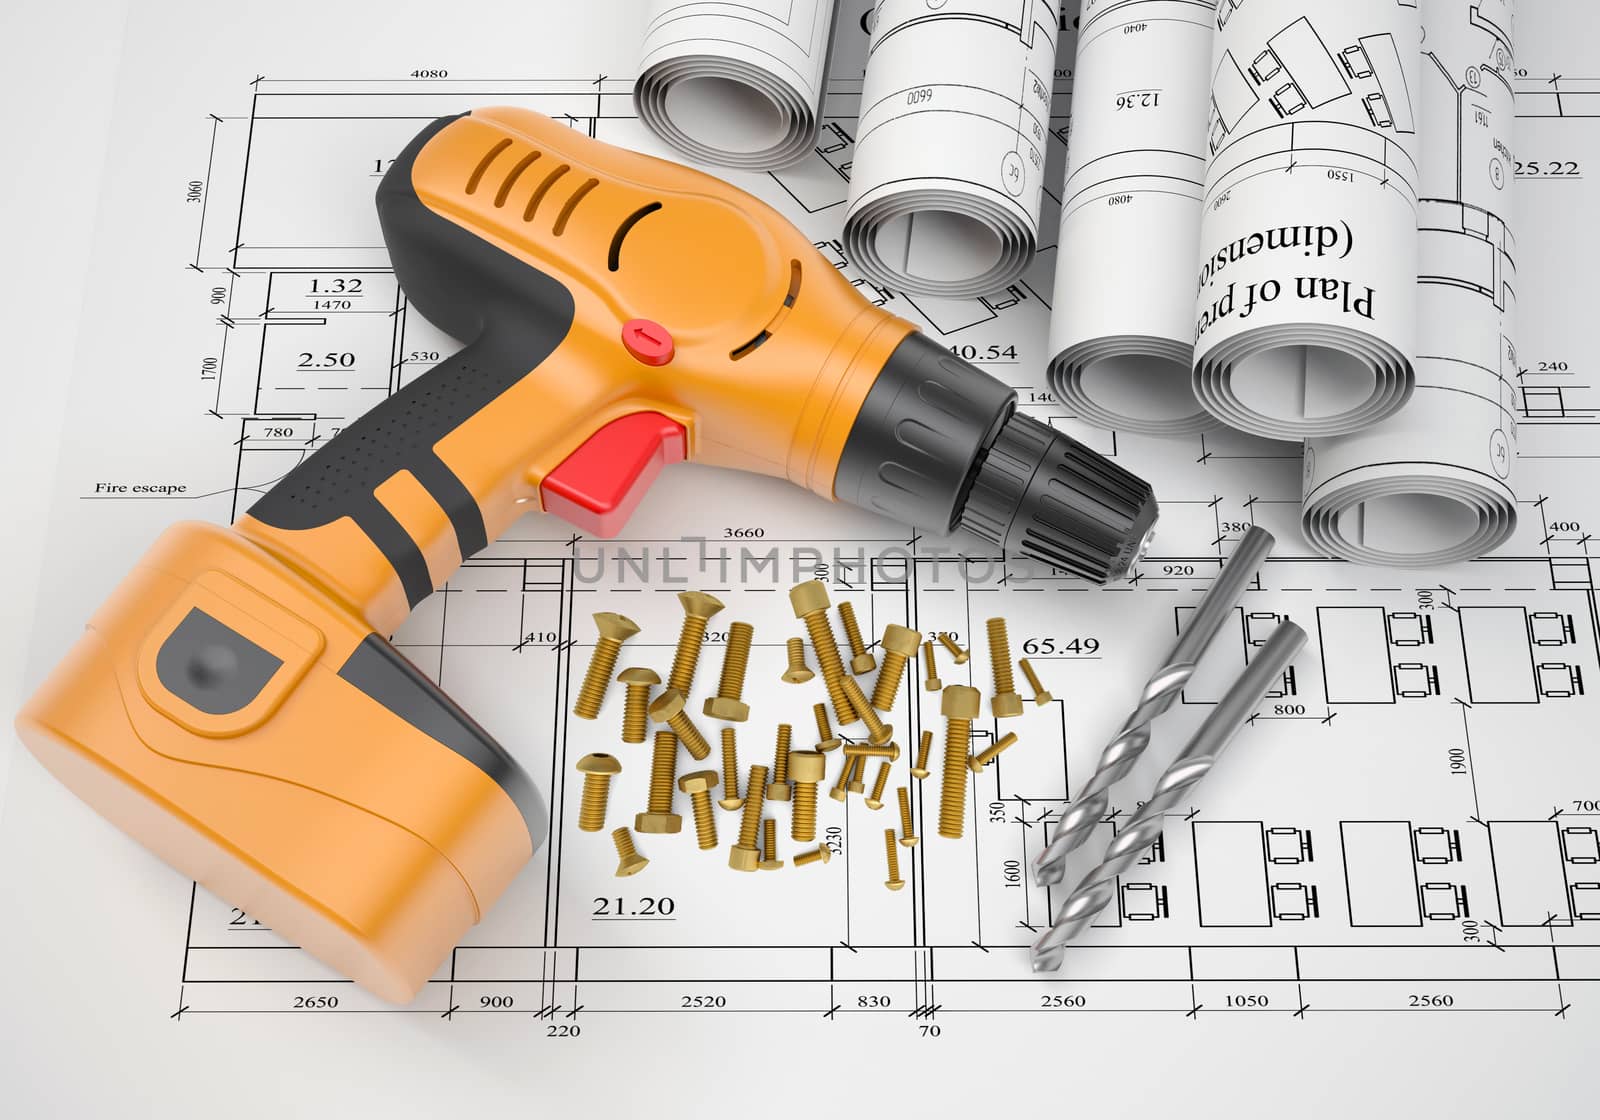 Electric screwdriver, fastening hardware, borers, scrolled drafts, architectural drawing by cherezoff